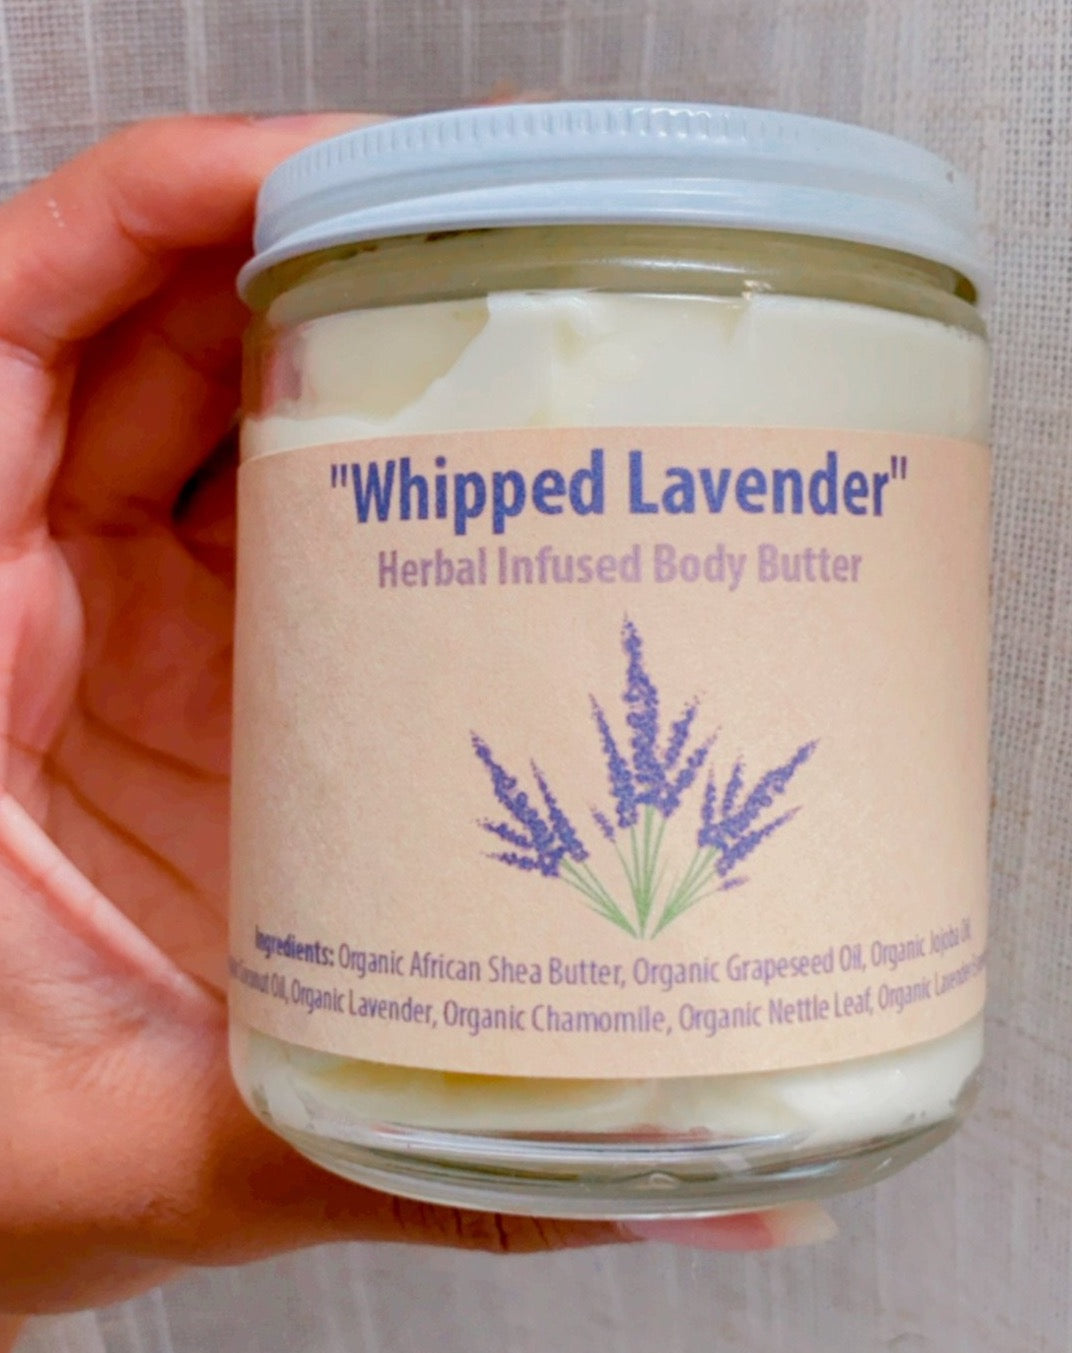 "Whipped Lavender" Herbal Infused Body Butter